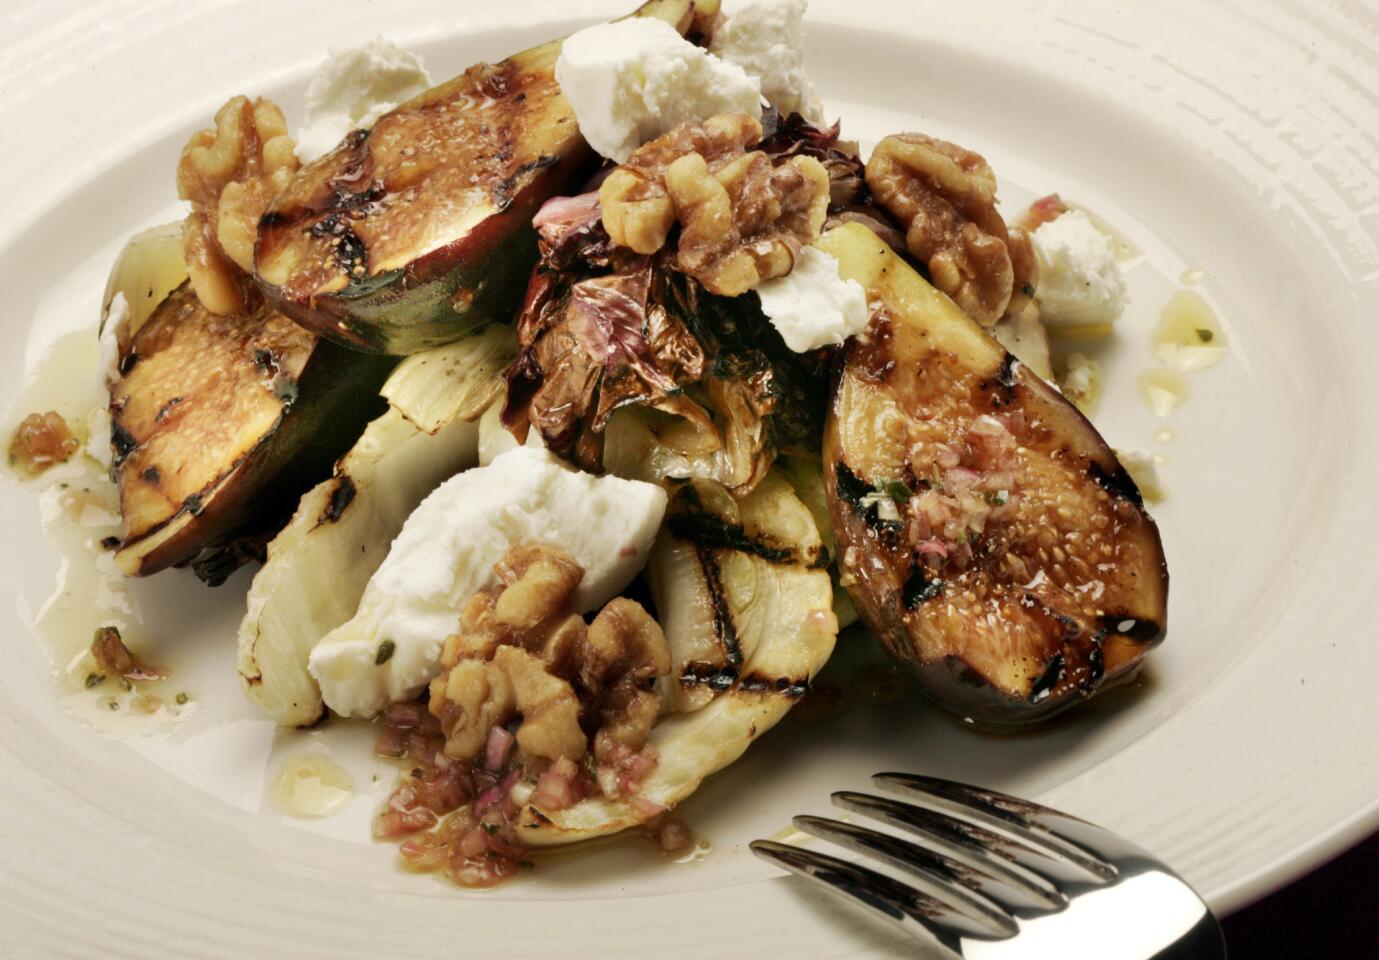 Grilled fig salad tossed with a sherry vinaigrette. Click here for the recipe.